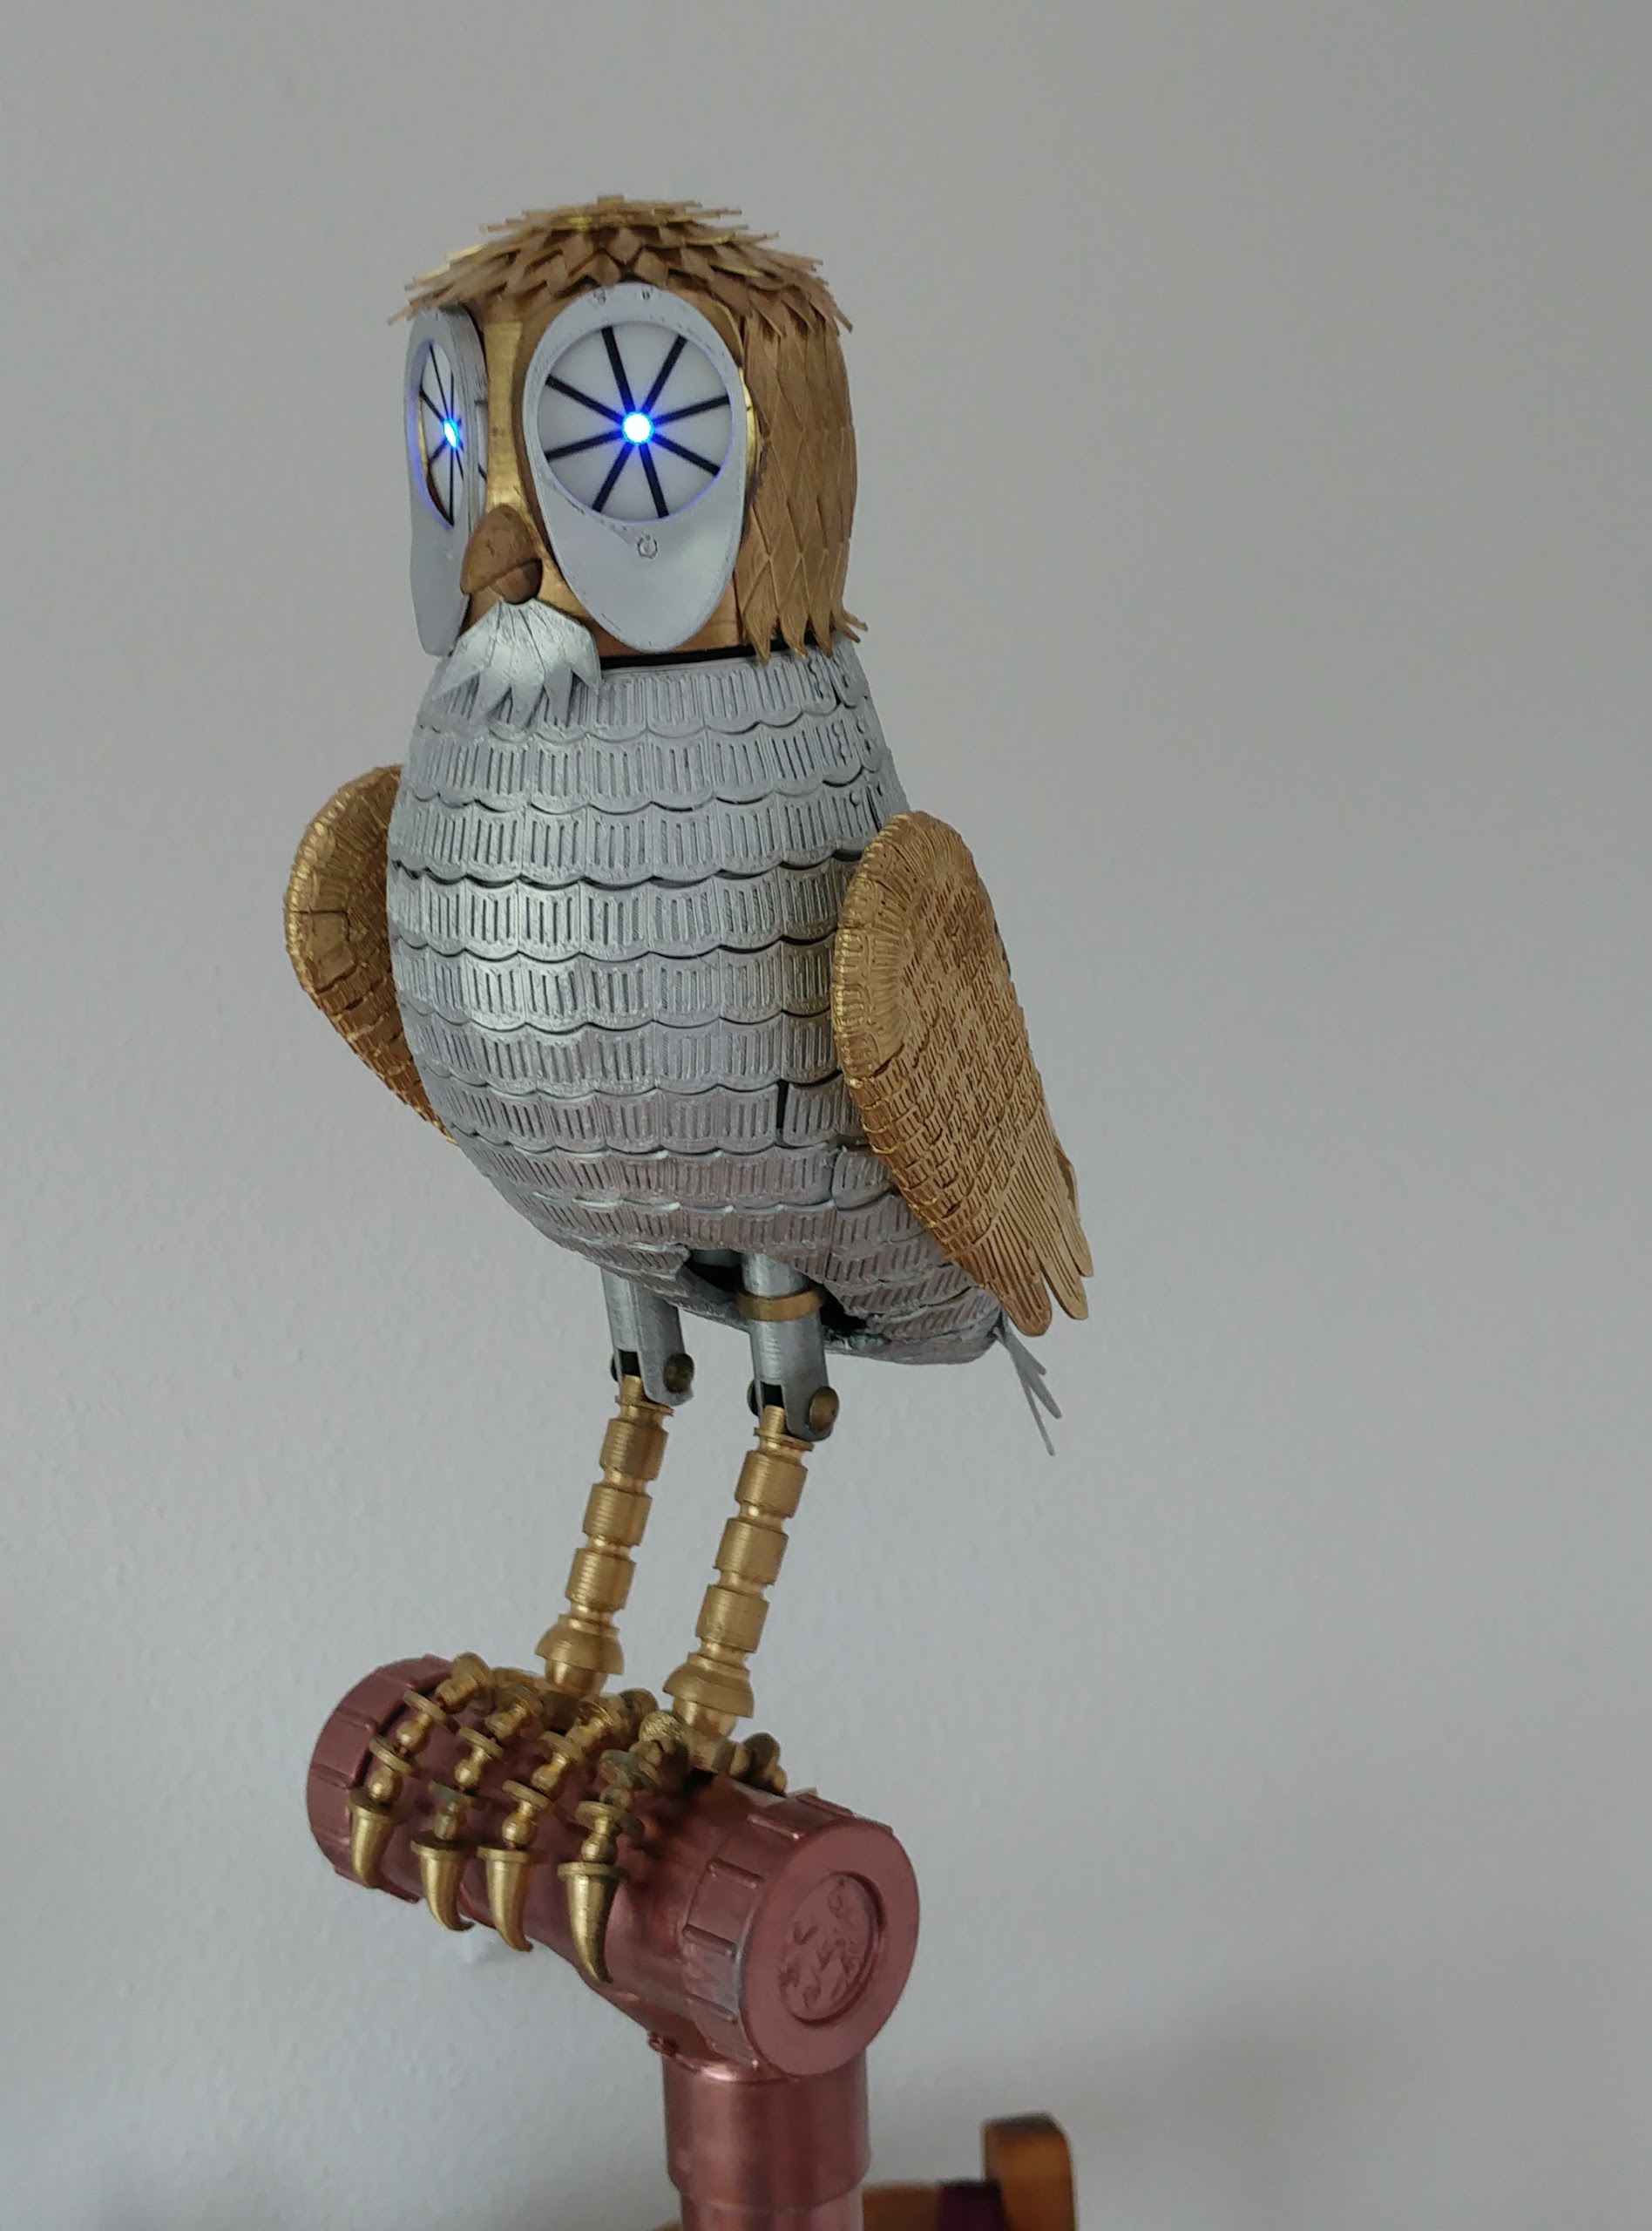 Bubo - the metallic, mechanical owl from Clash of the Titans.